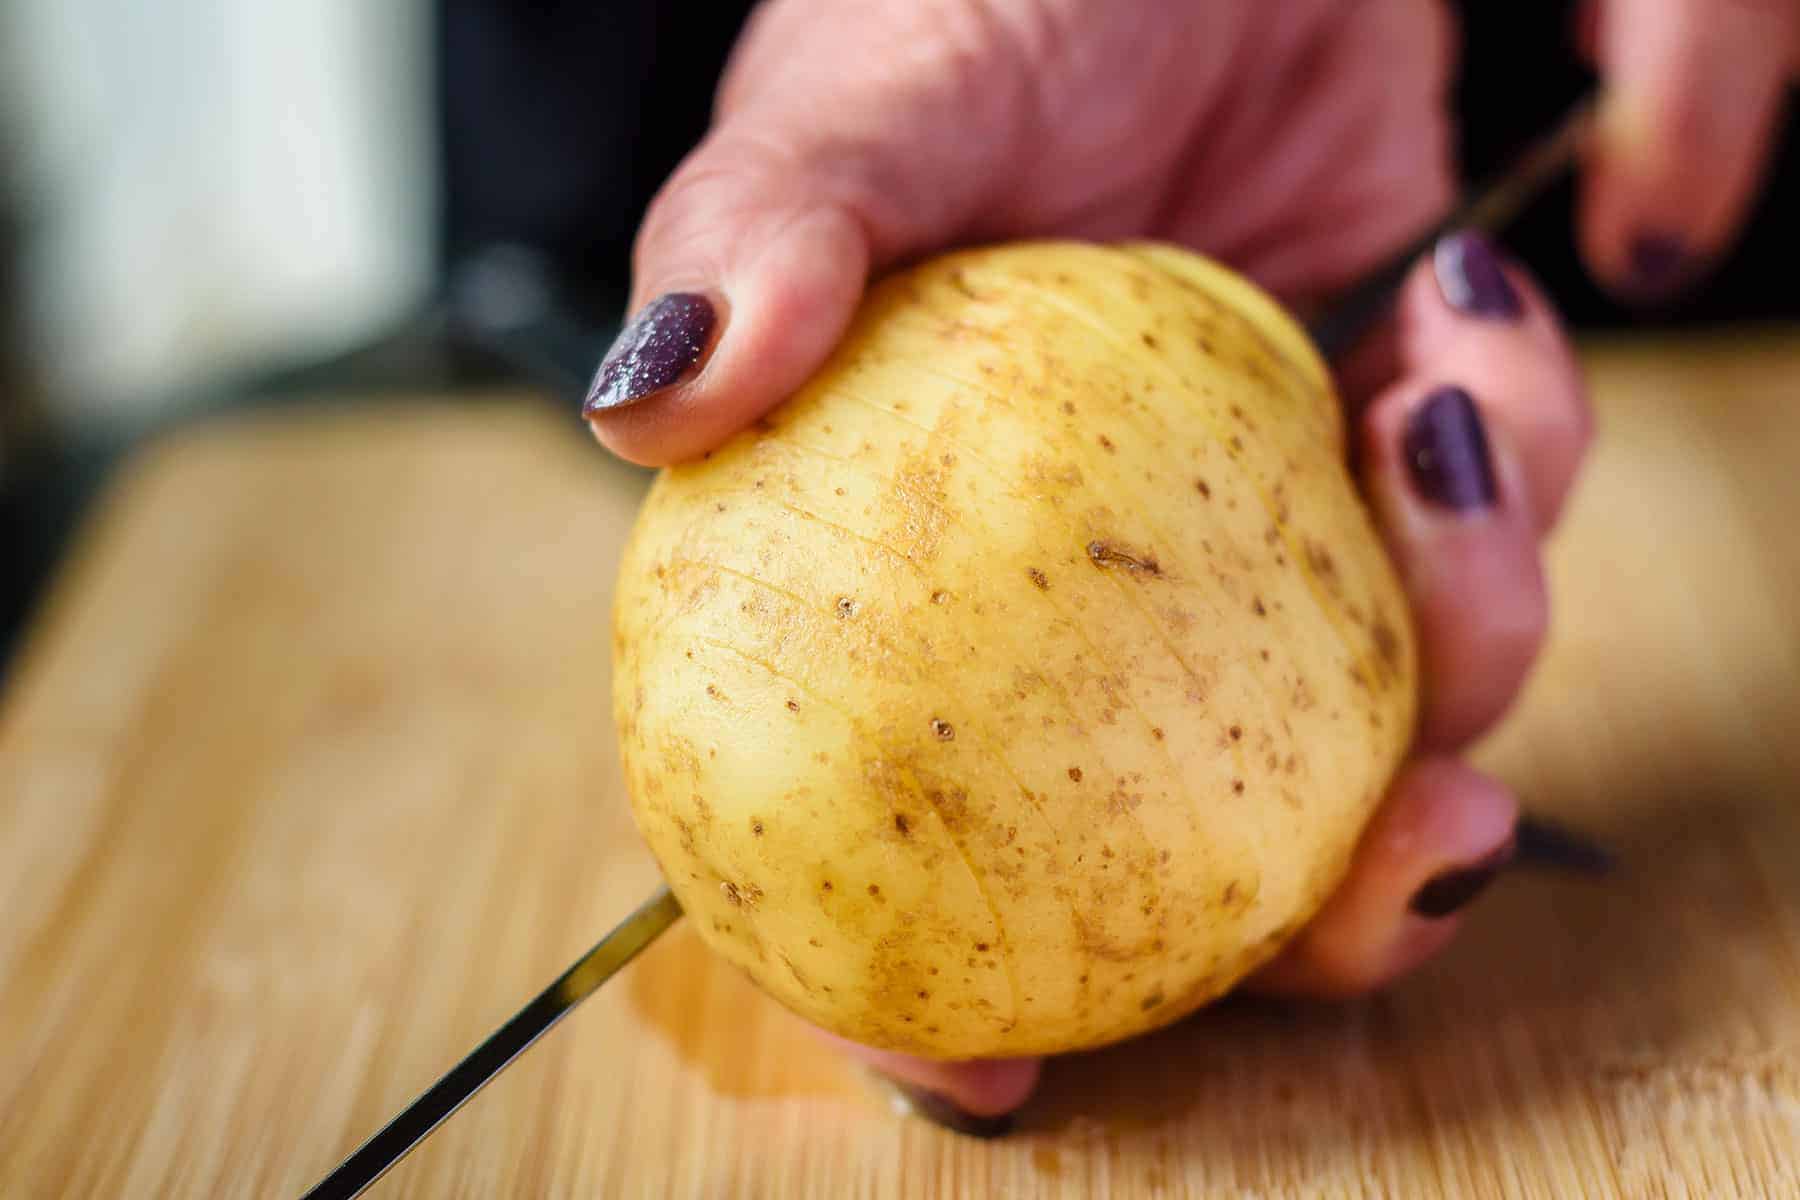 Removing skewer from sliced potato